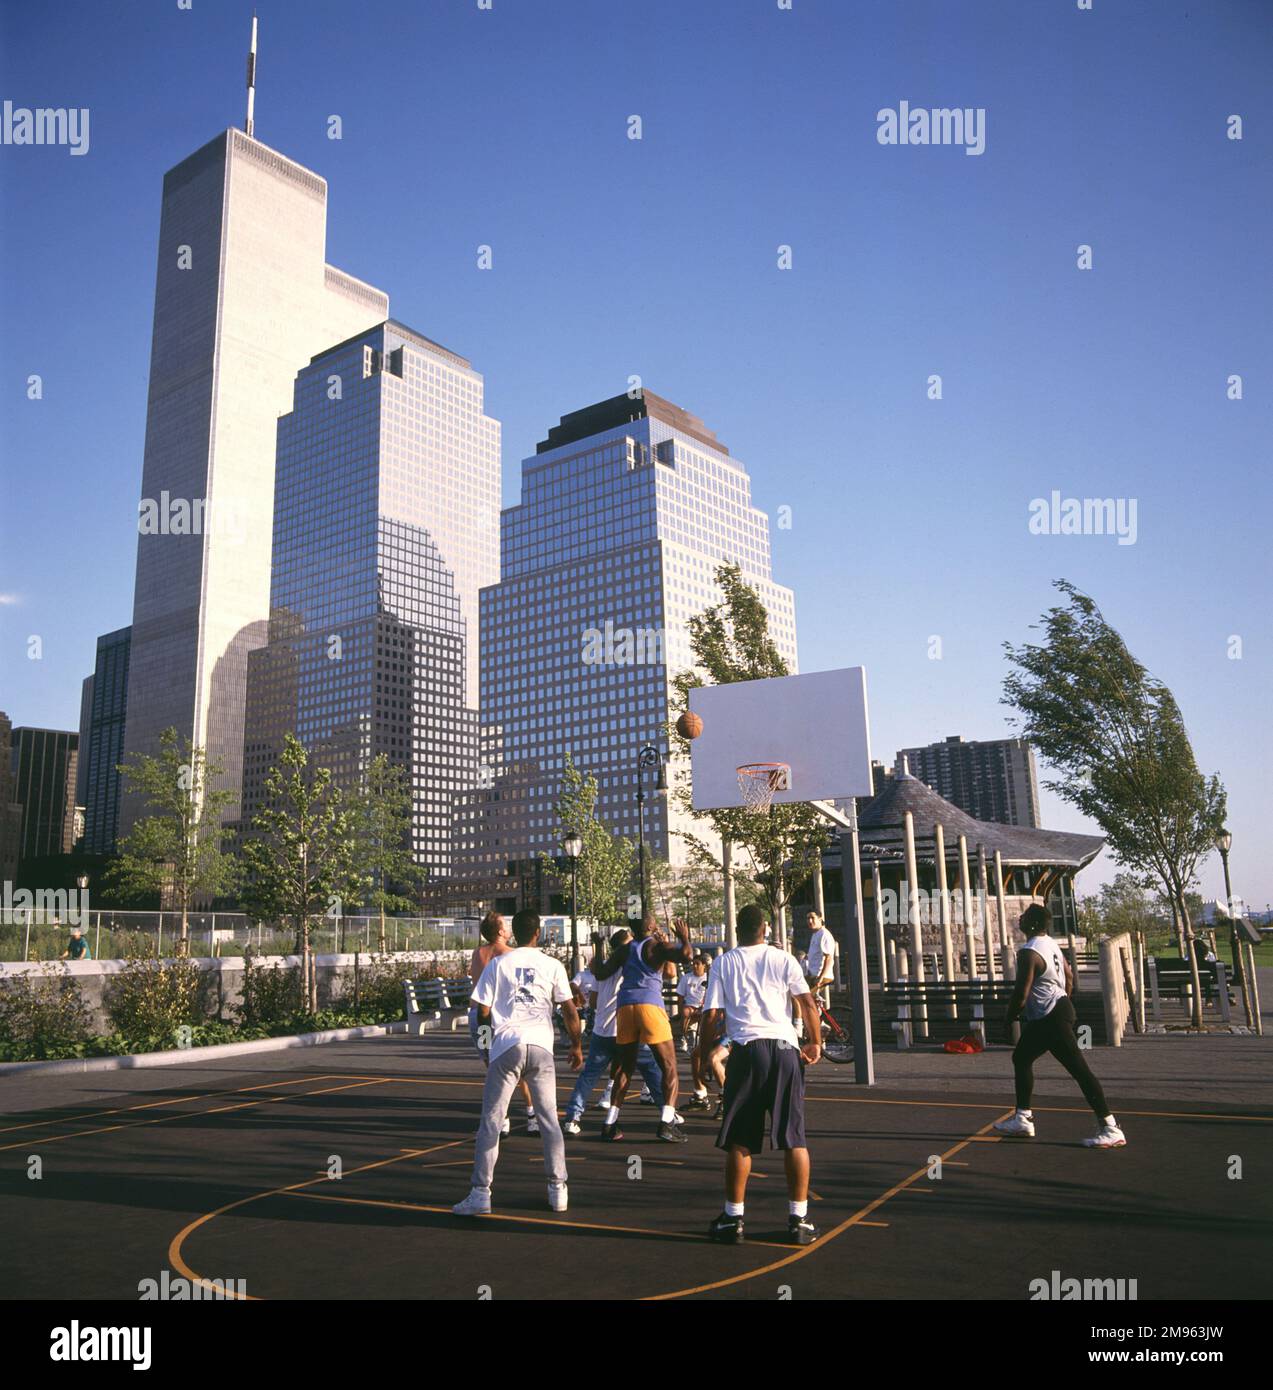 A basketball game taking place beneath skyscrapers, including the twin towers of the World Trade Center which were destroyed by terrorists on 11 September 2001. Stock Photo